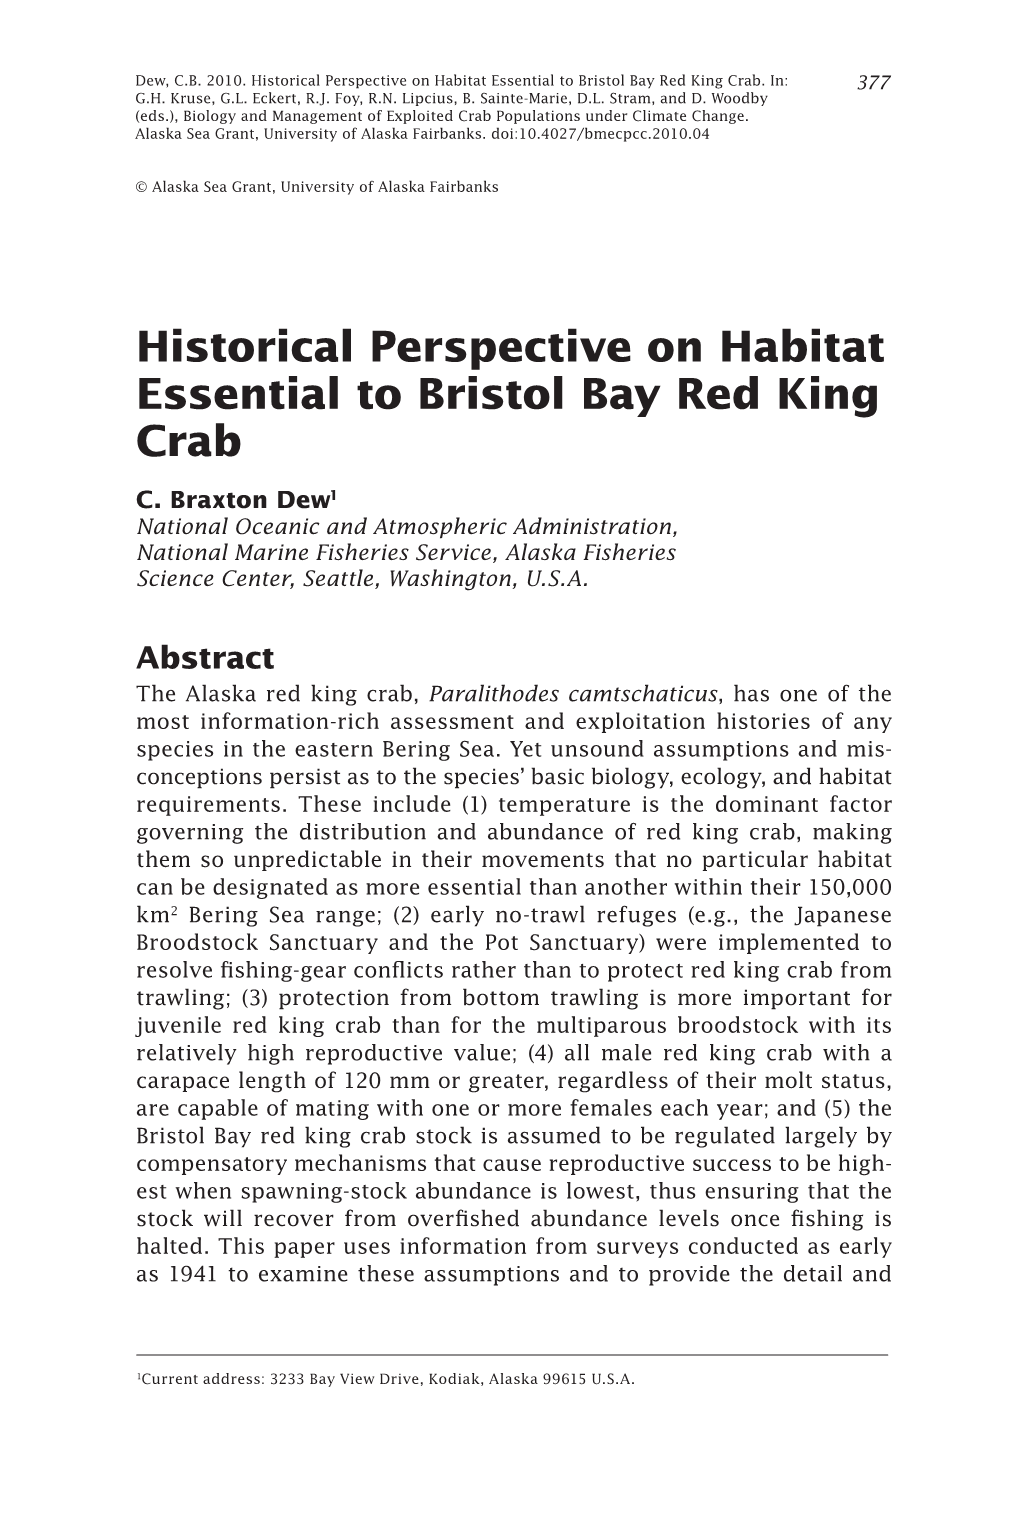 Historical Perspective on Habitat Essential to Bristol Bay Red King Crab